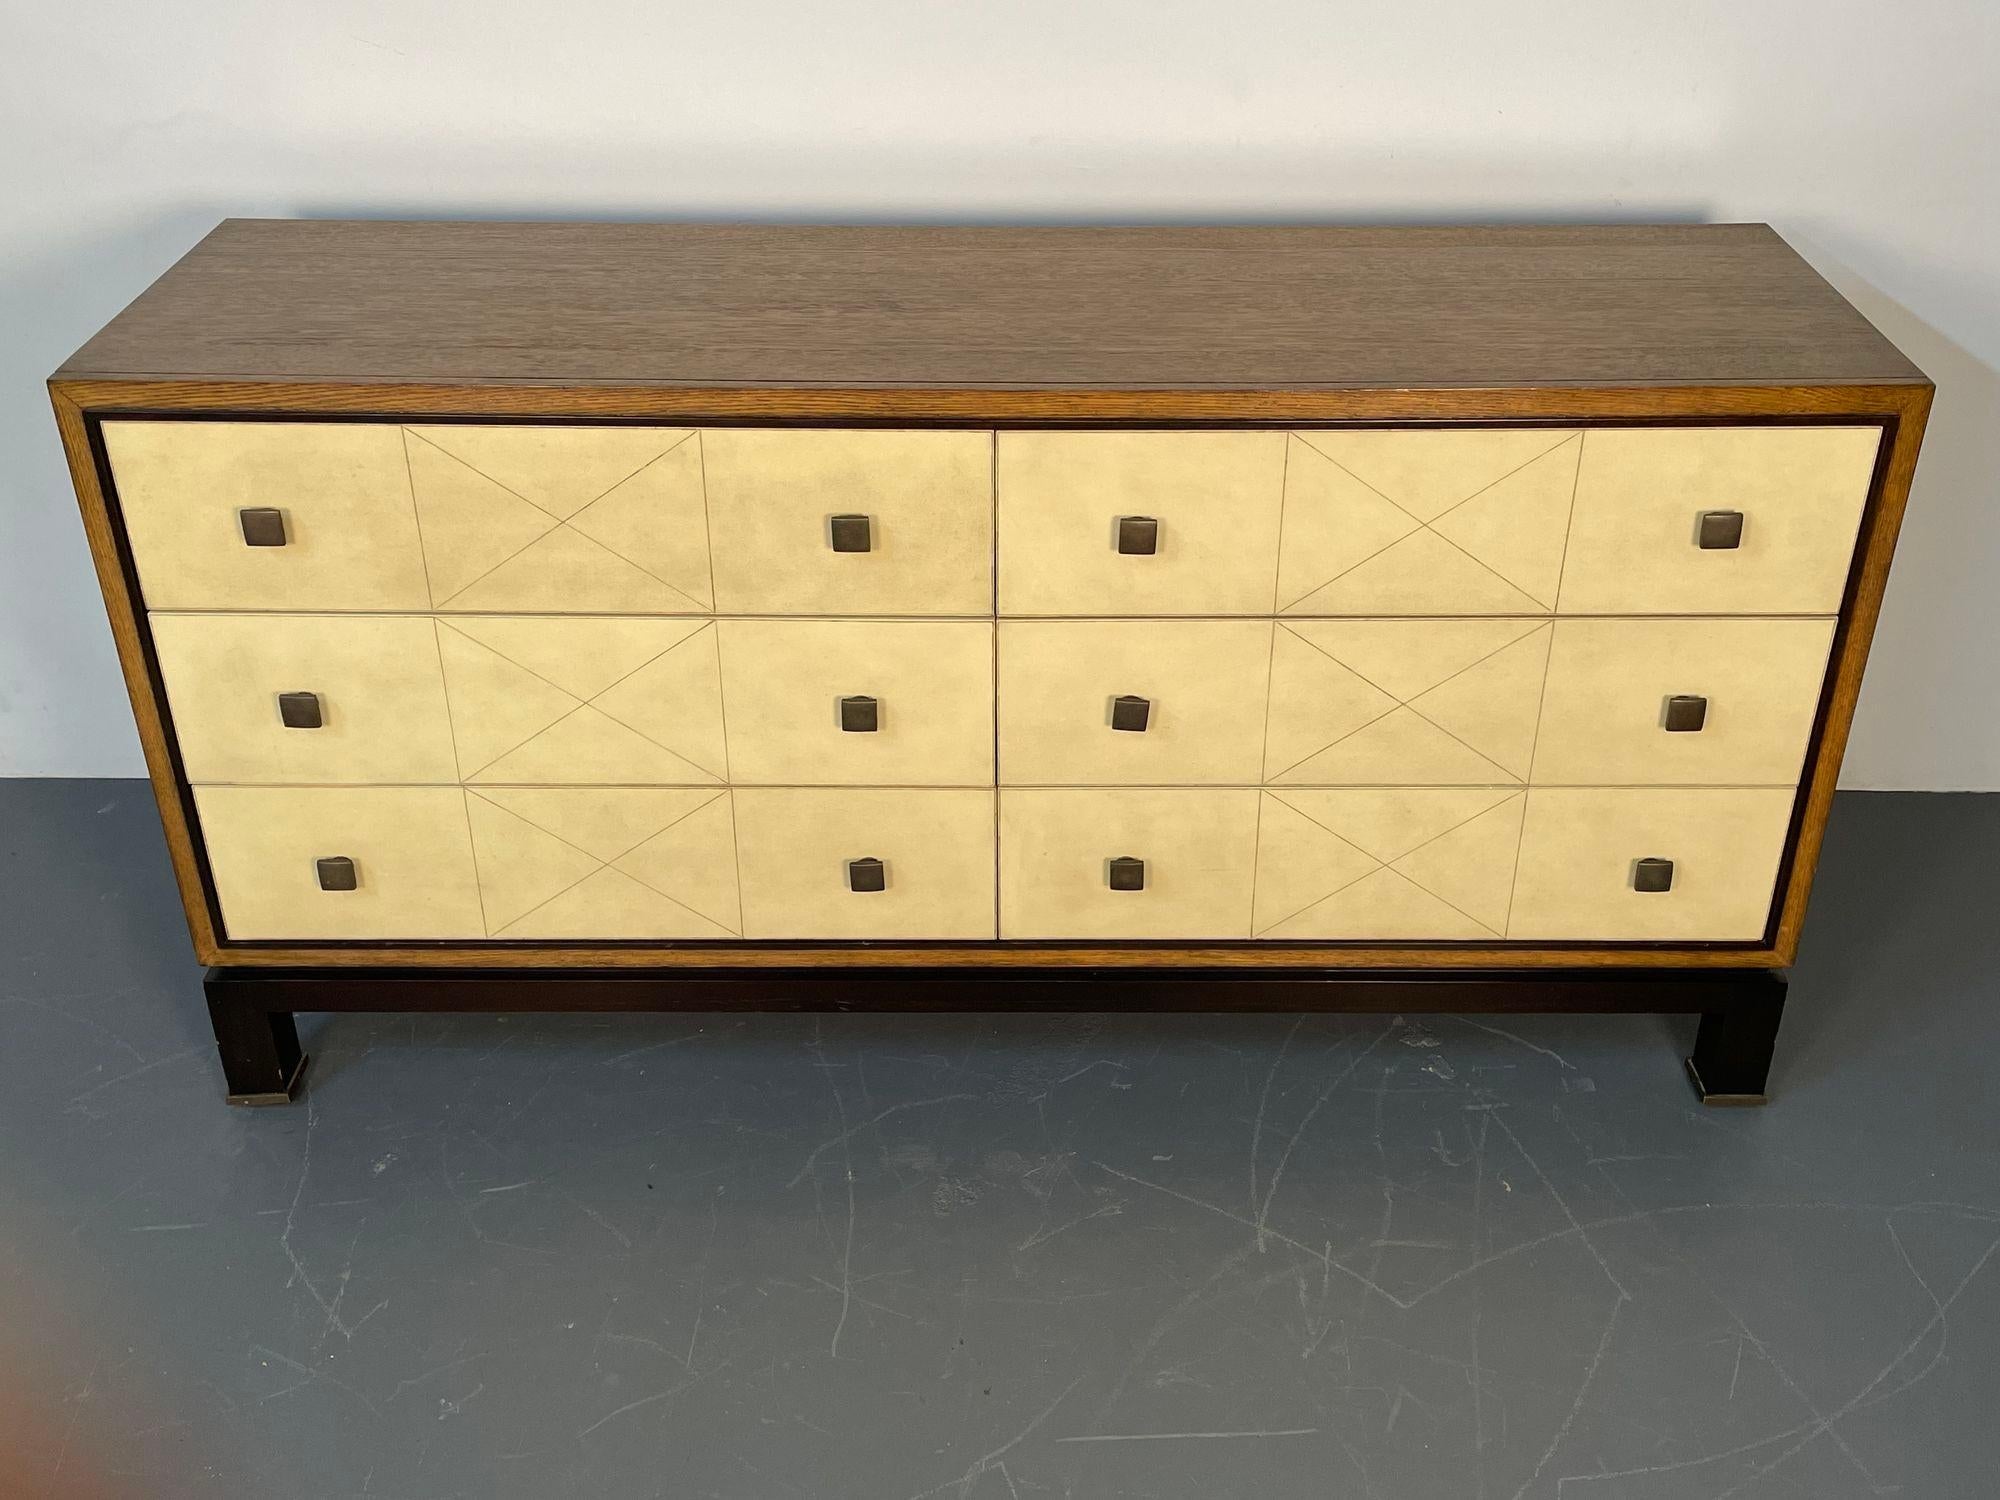 20th Century Mid-Century Modern Parzinger Style Parchment Dresser / Sideboard / Cabinet For Sale